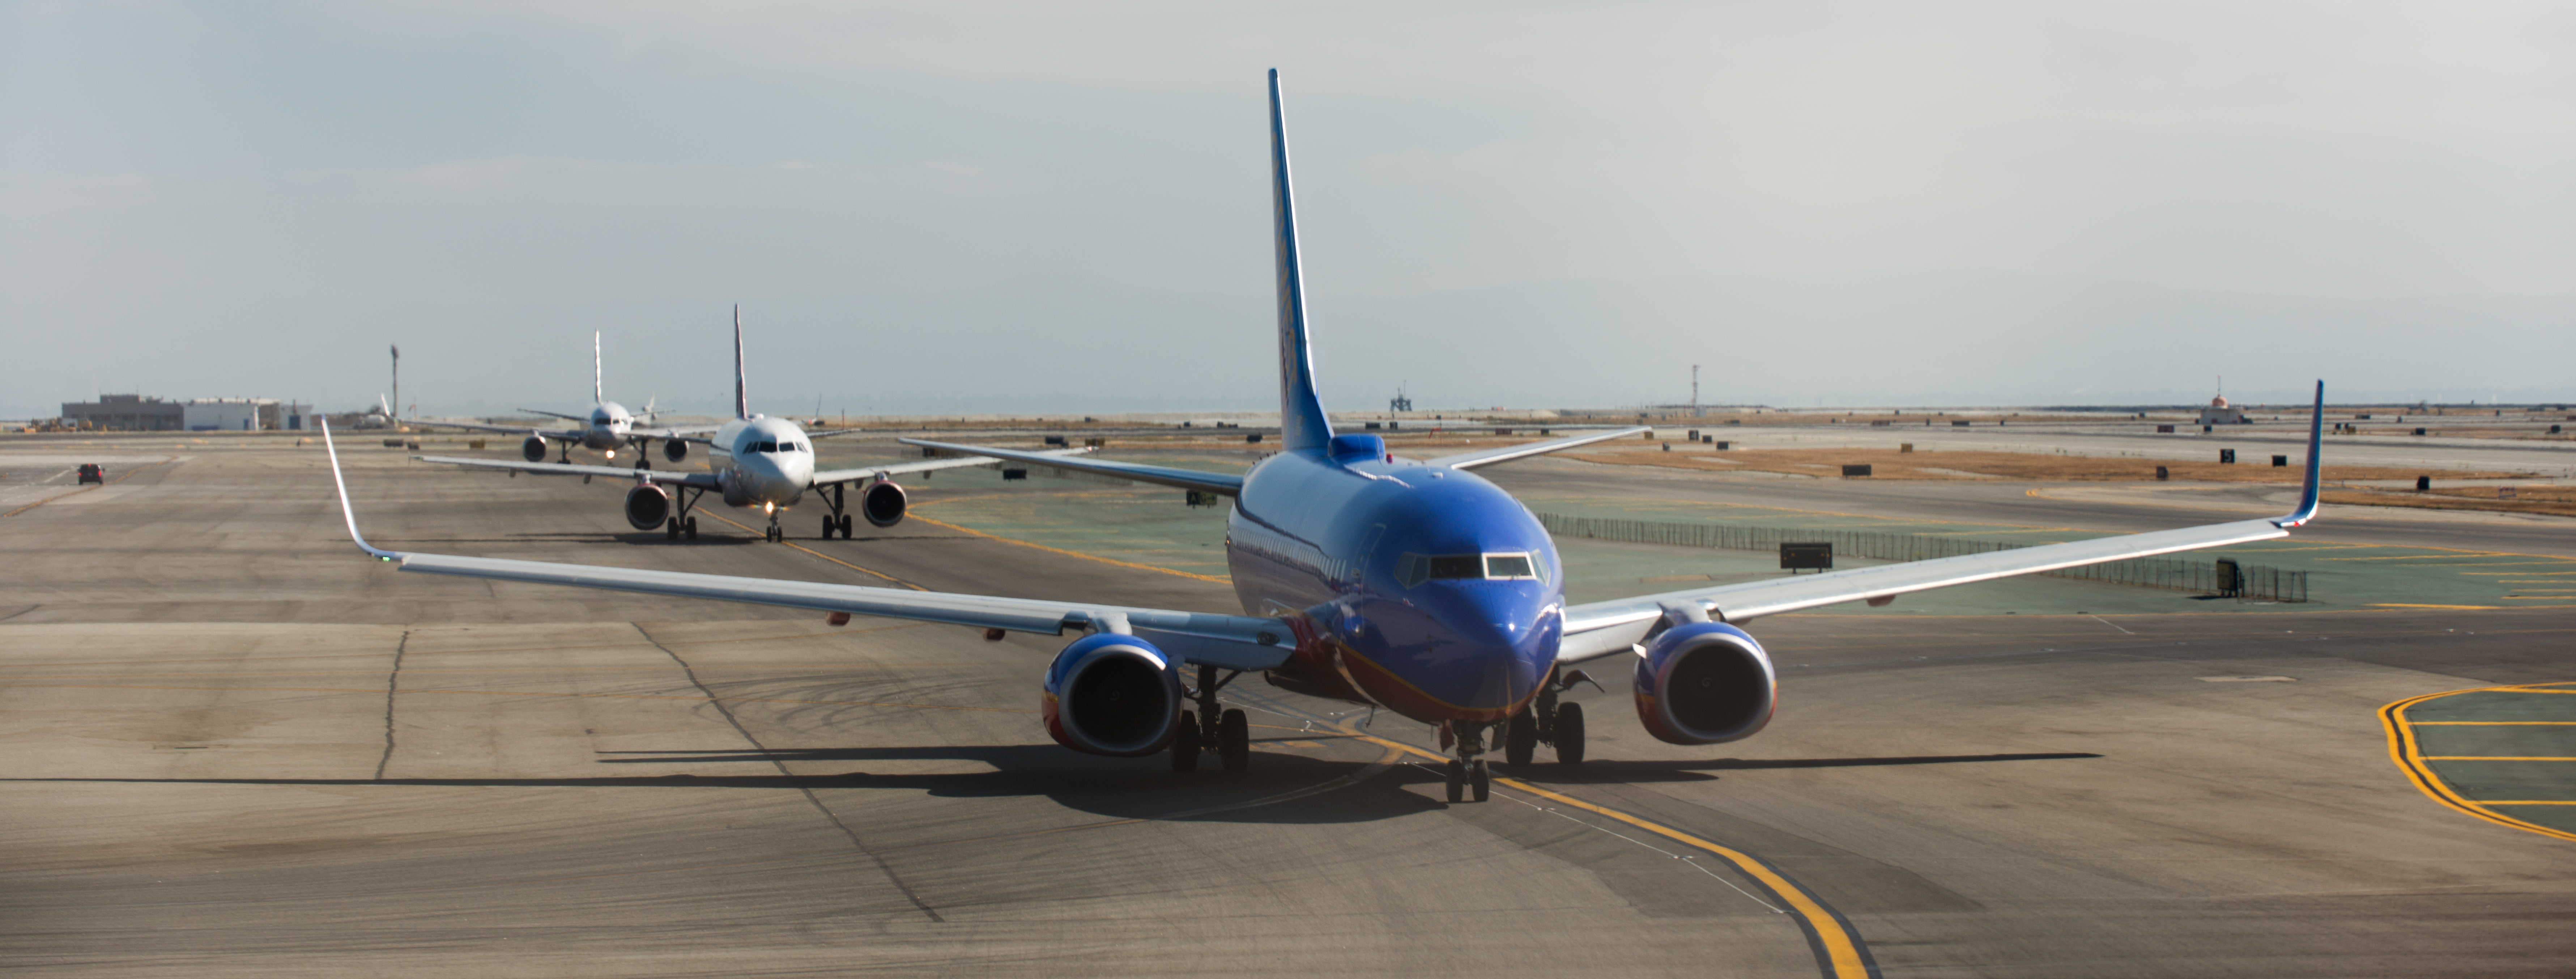 Three planes waiting in line for takeoff at sfo photo